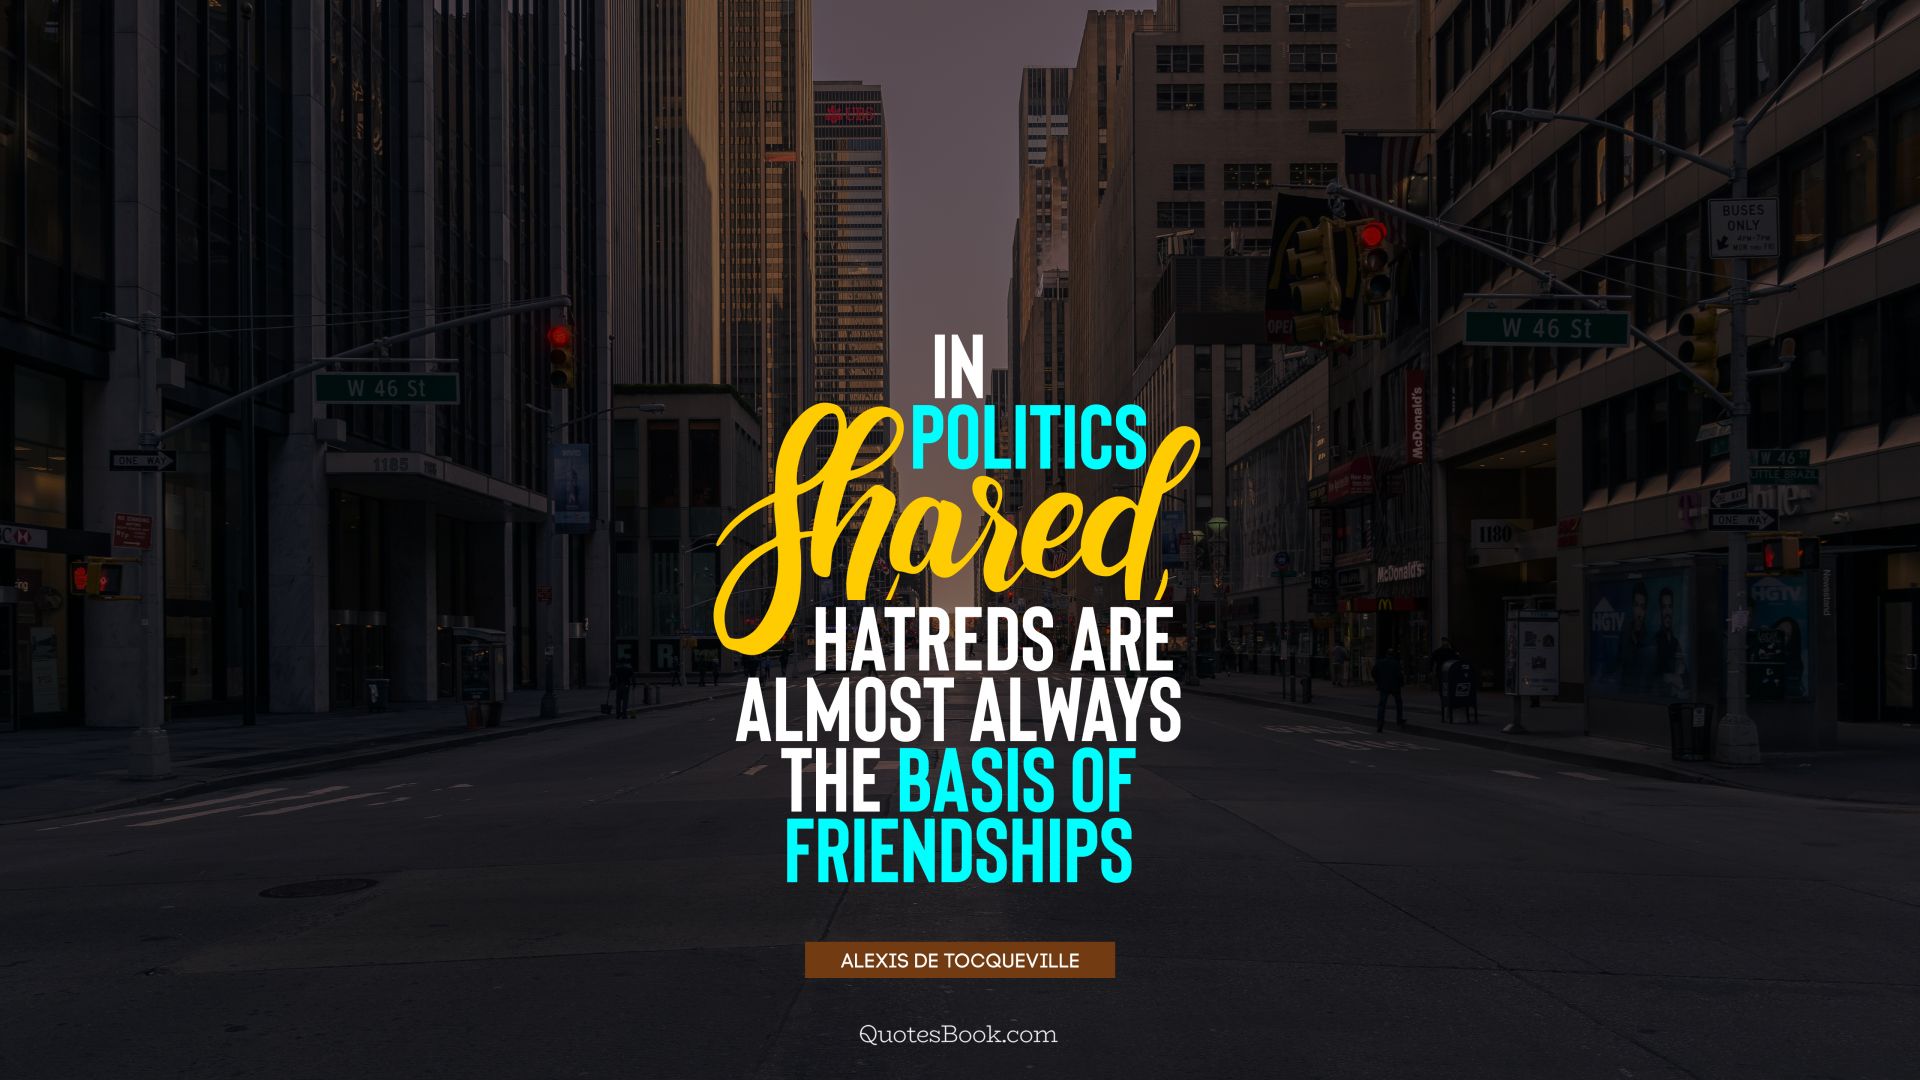 In politics shared hatreds are almost always the basis of friendships. - Quote by Alexis de Tocqueville